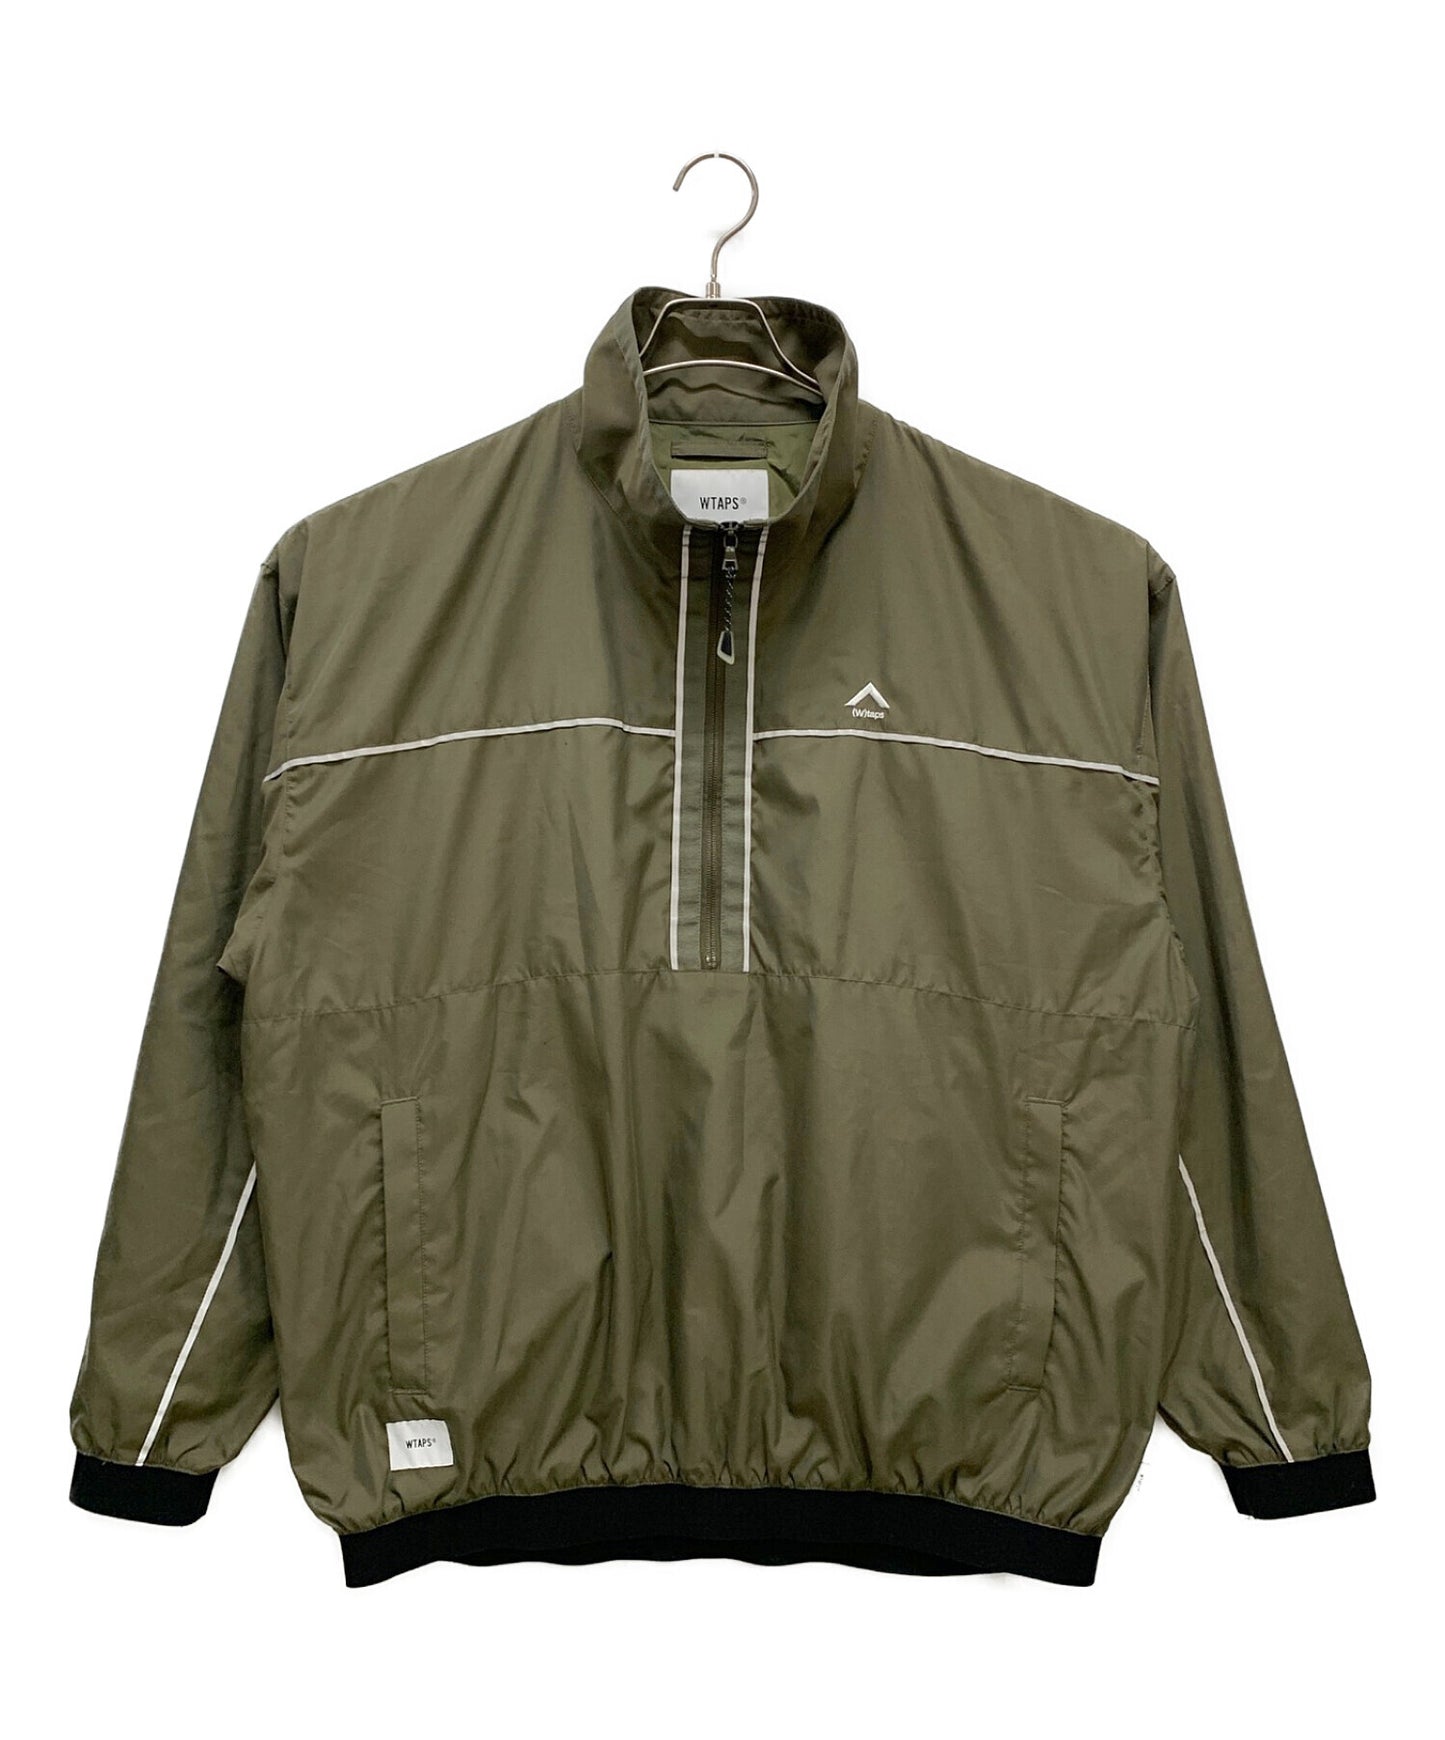 [Pre-owned] WTAPS KEEPER JACKET 192wvdt-jkm01